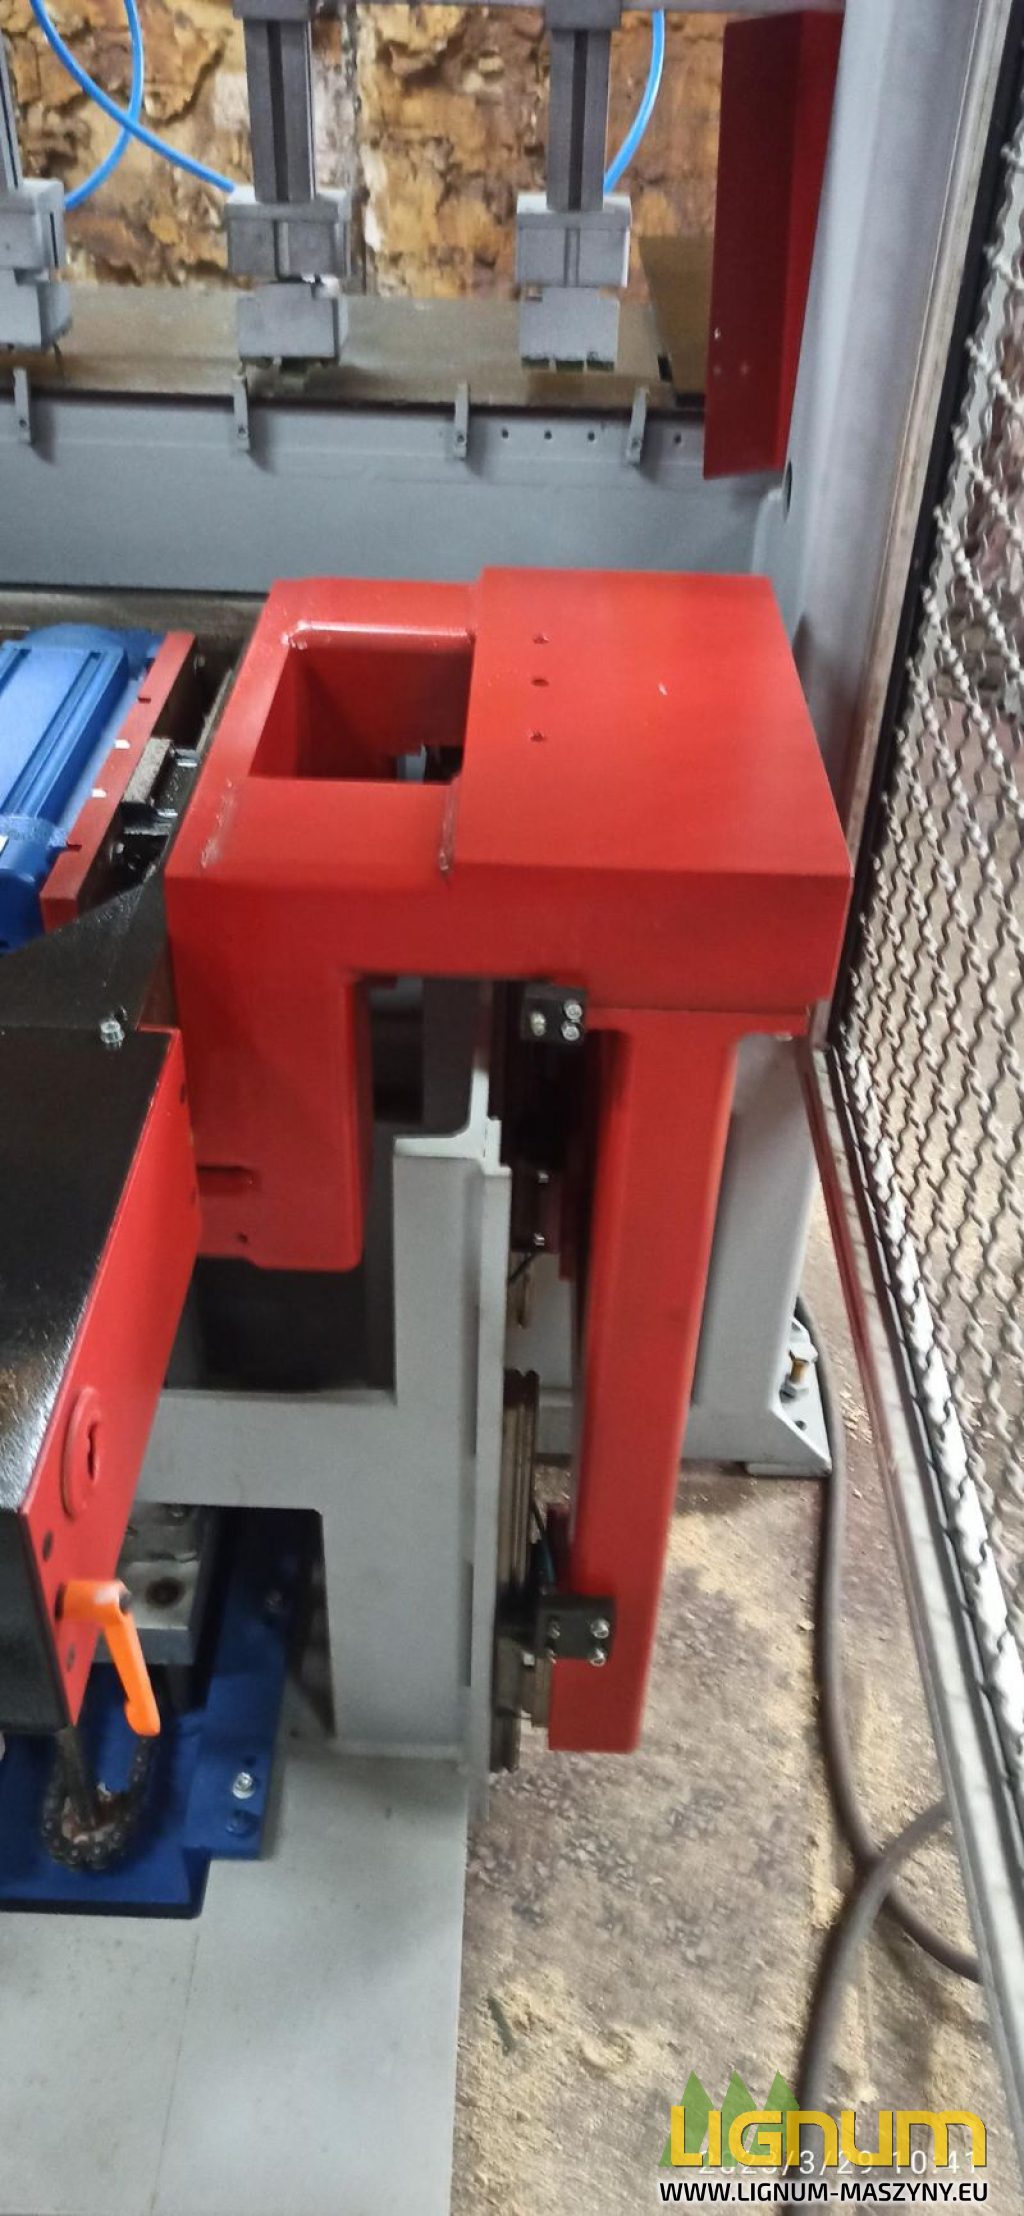   Koch multi-spindle drilling machine with 25 spindles